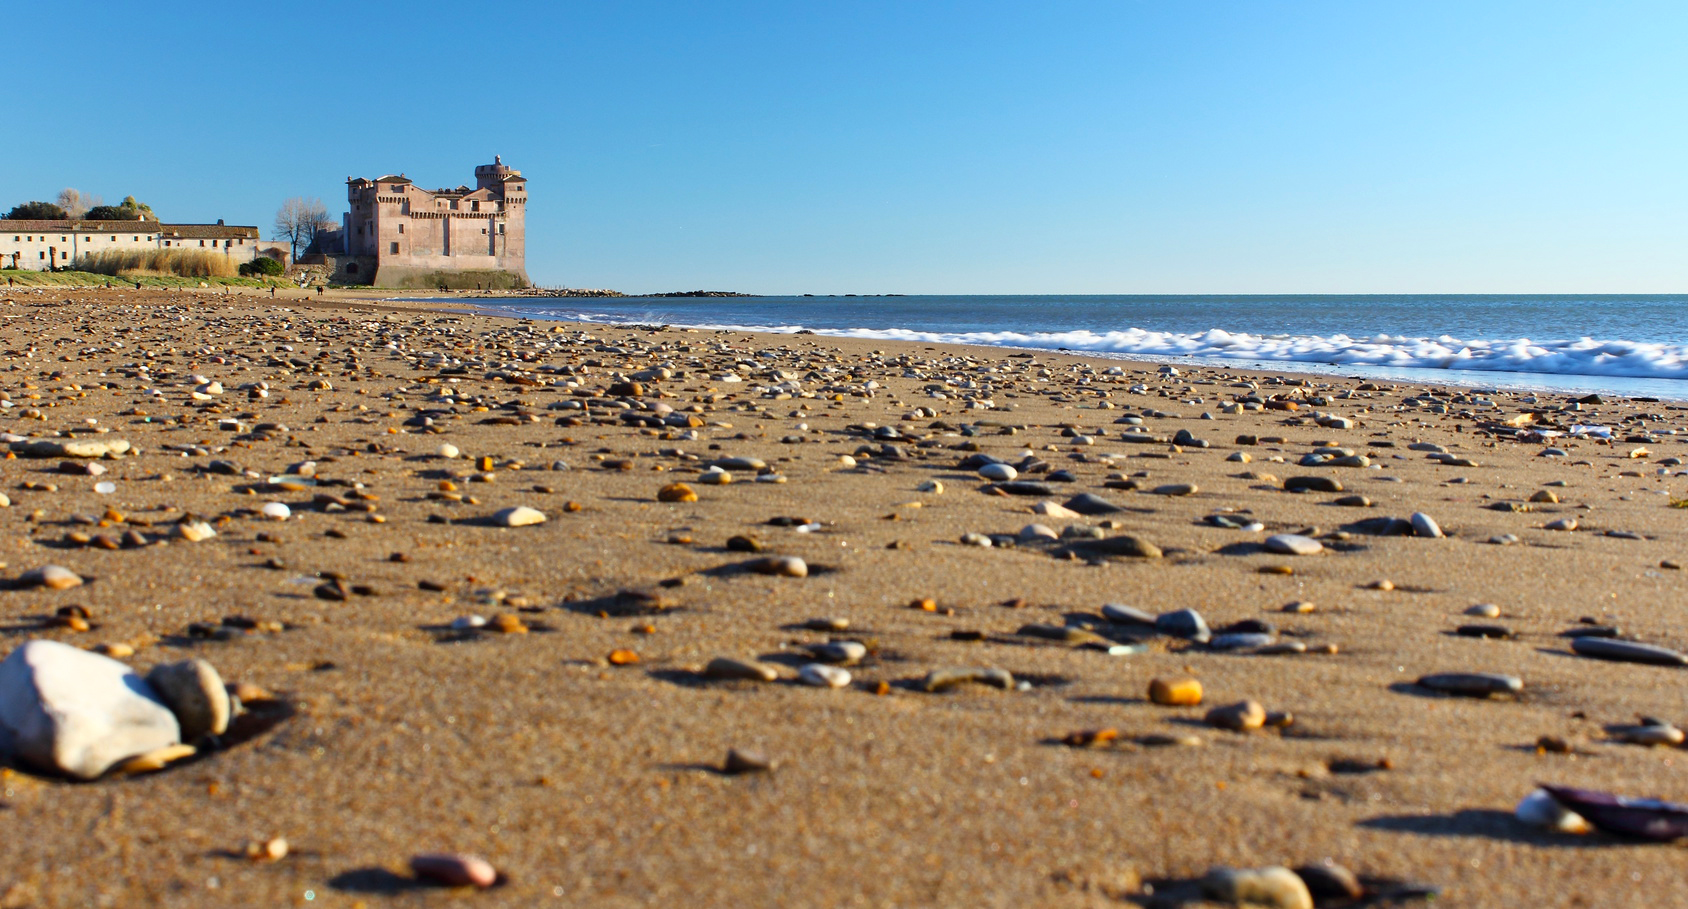 The beach of Santa Severa is the ideal place to take a romantic walk in winter